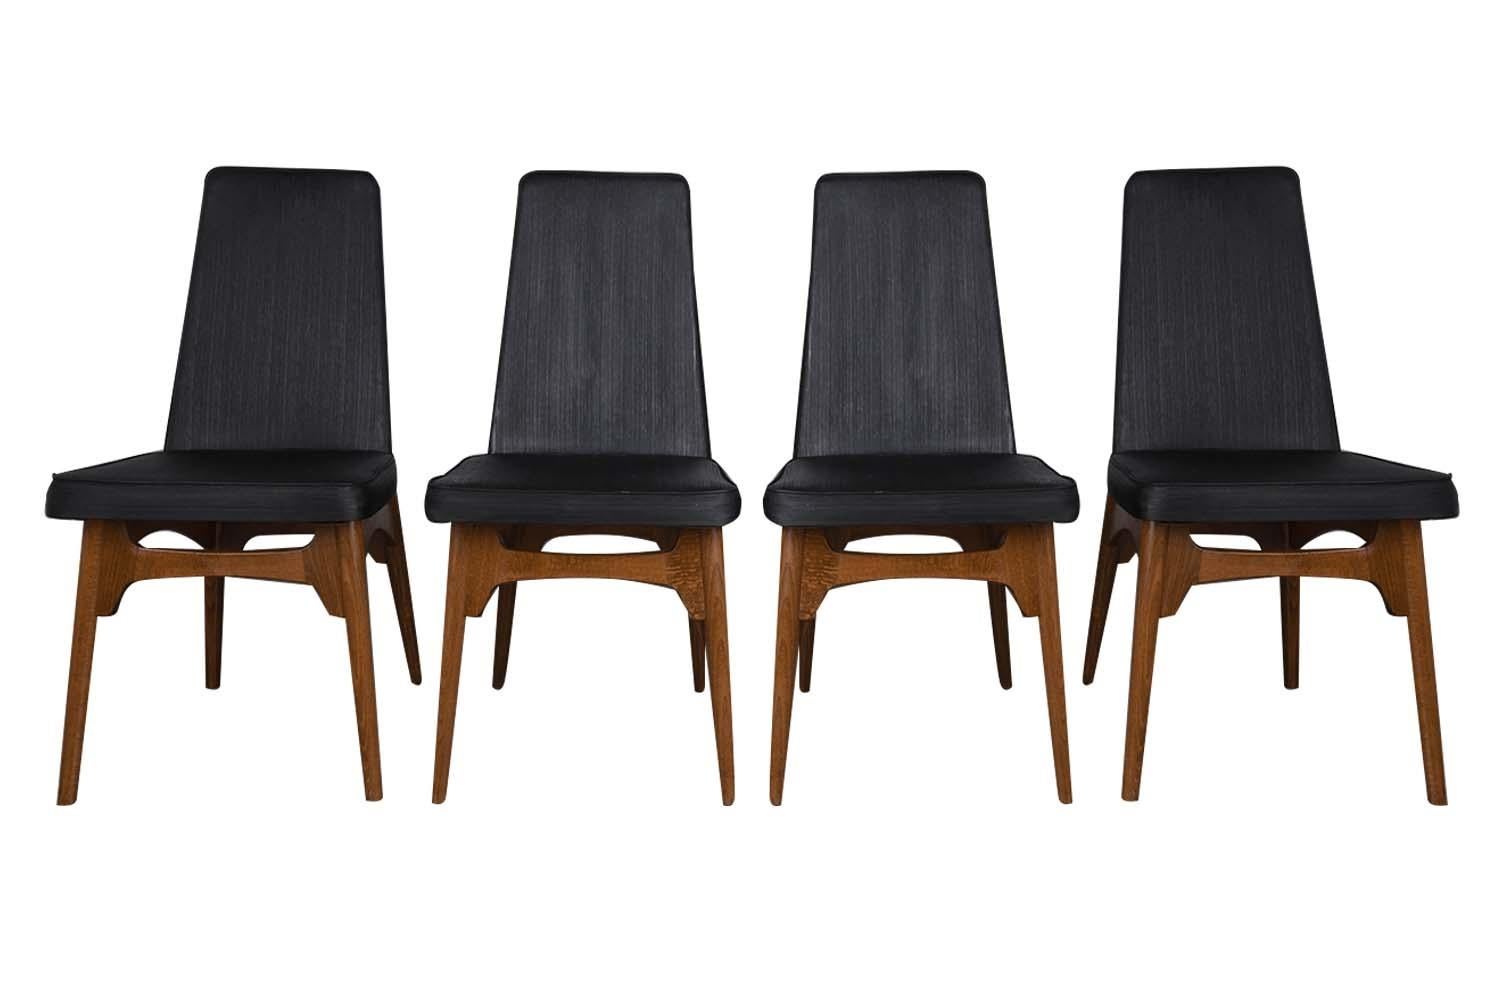 An outstanding set of four beautiful midcentury Adrian Pearsall style dining chairs with walnut frames and black upholstery, circa 1960s. Organic and functional aesthetic are showcased in these beautifully crafted modern walnut dining chairs. These